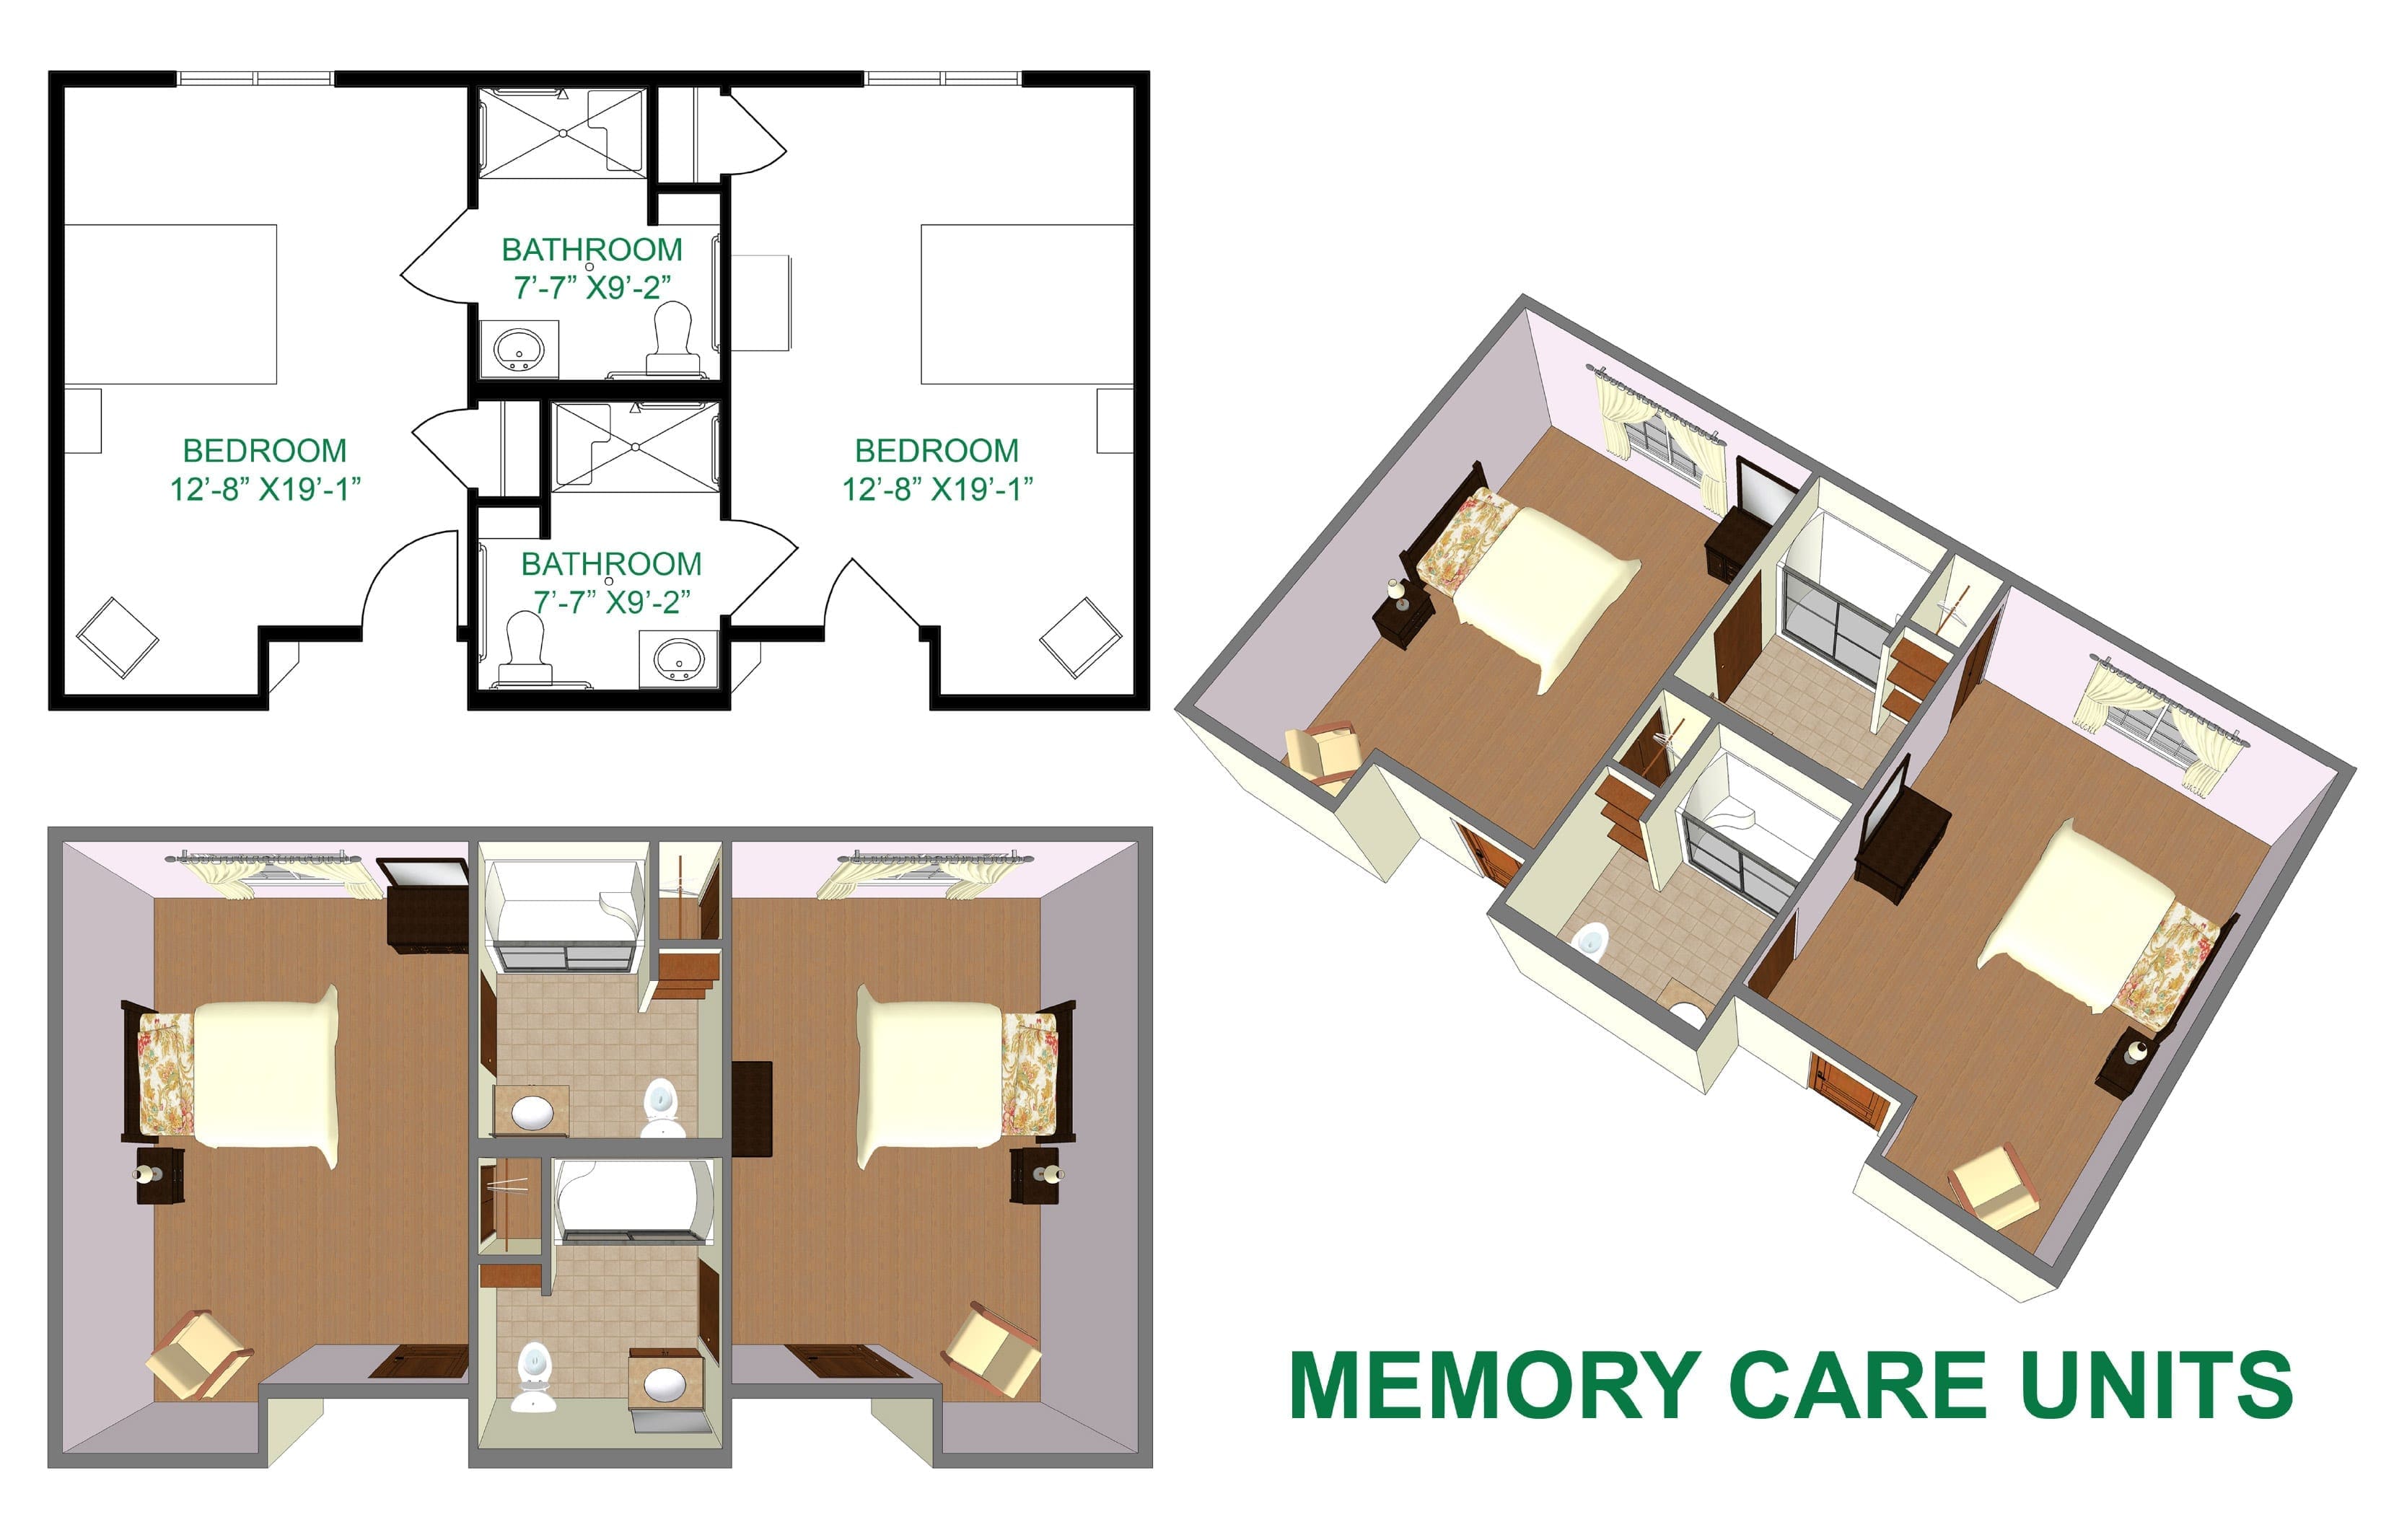 The Village at Skyline Pines memory care room layout